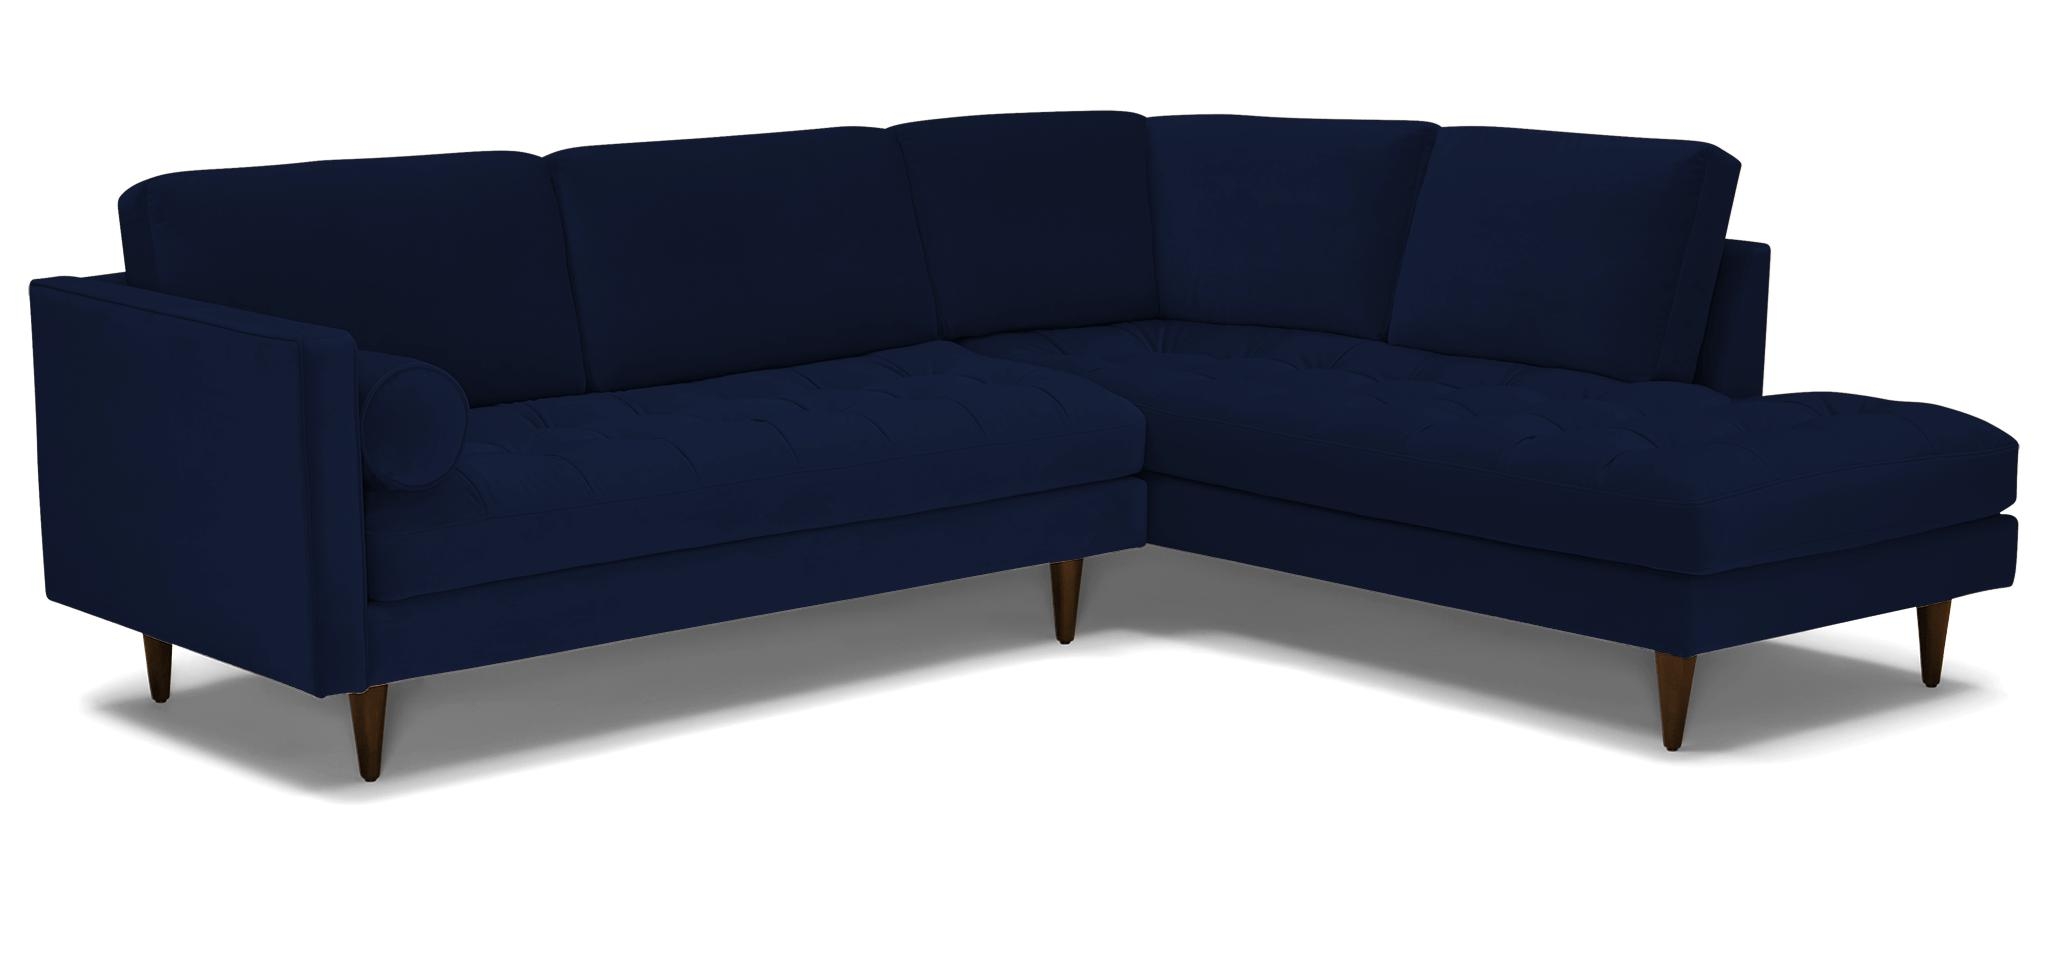 Blue Briar Mid Century Modern Sectional with Bumper - Royale Cobalt - Mocha - Right  - Image 1